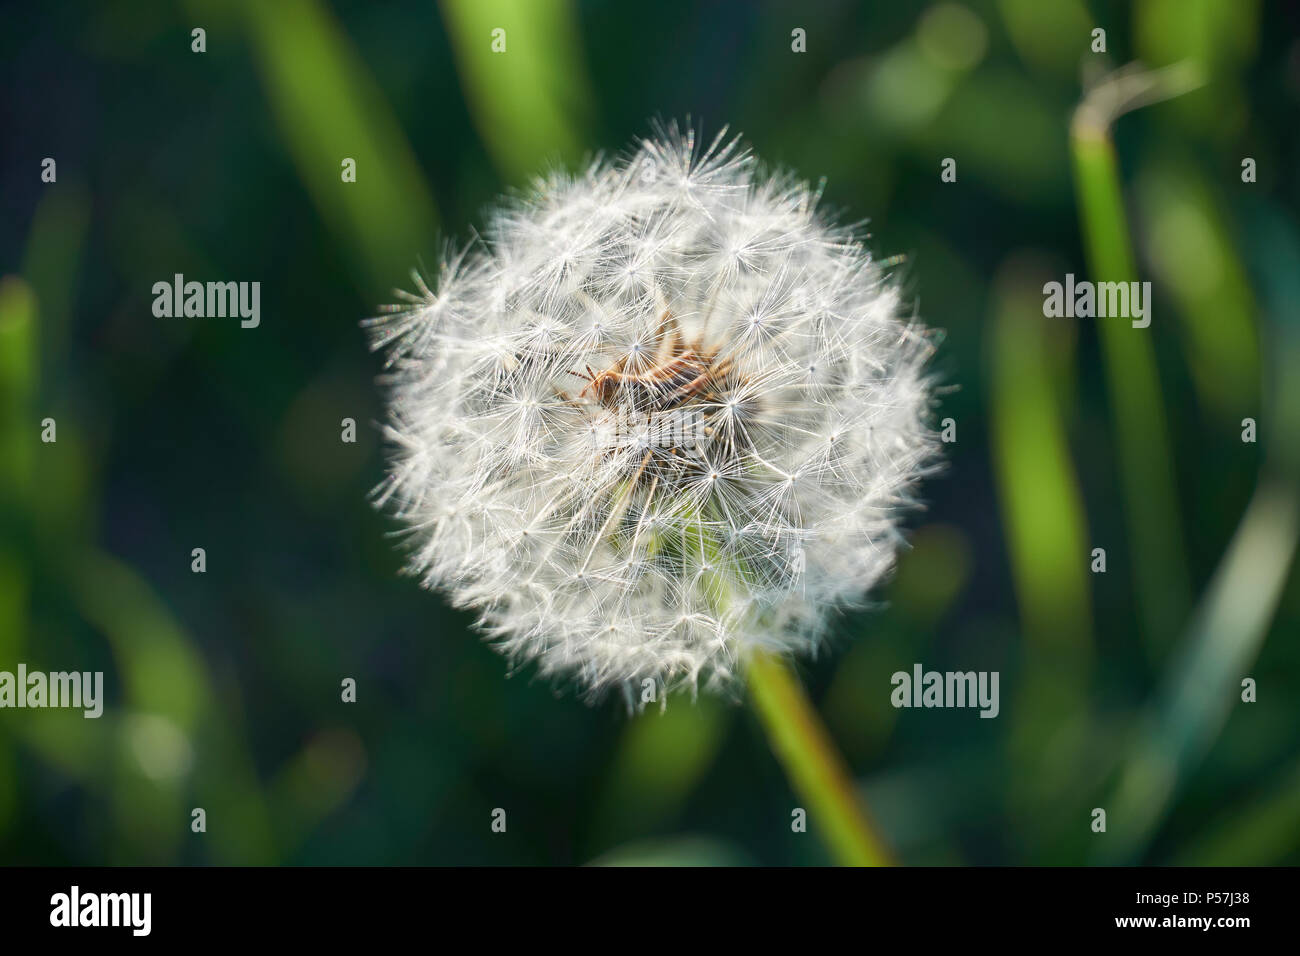 Grasshopper hides inside a dandelion in the middle of a field Stock Photo